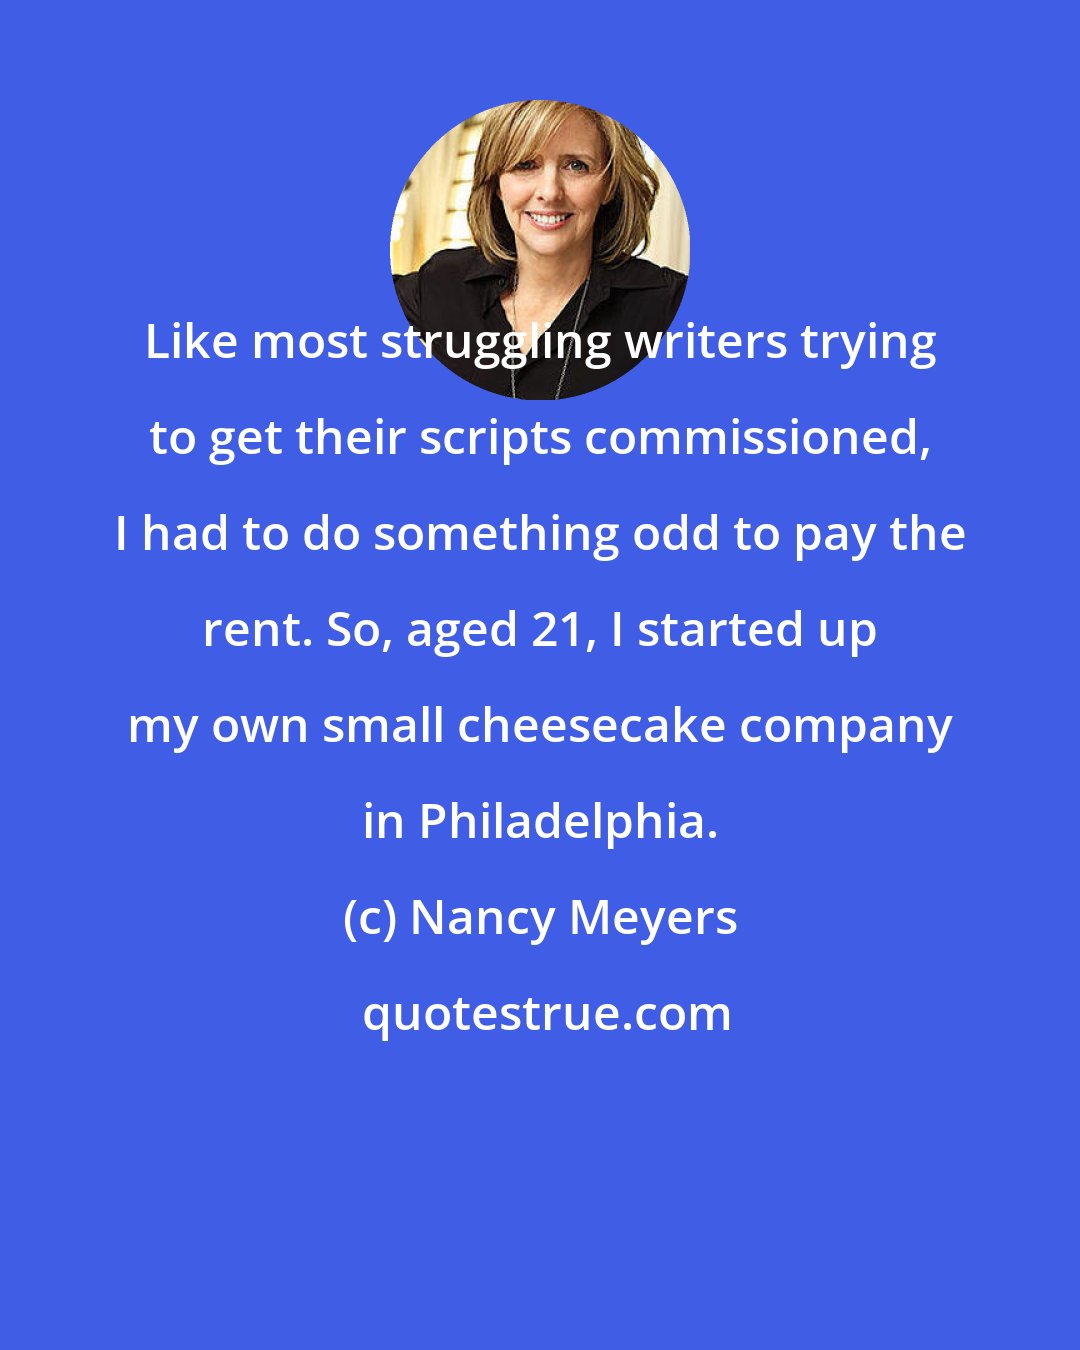 Nancy Meyers: Like most struggling writers trying to get their scripts commissioned, I had to do something odd to pay the rent. So, aged 21, I started up my own small cheesecake company in Philadelphia.